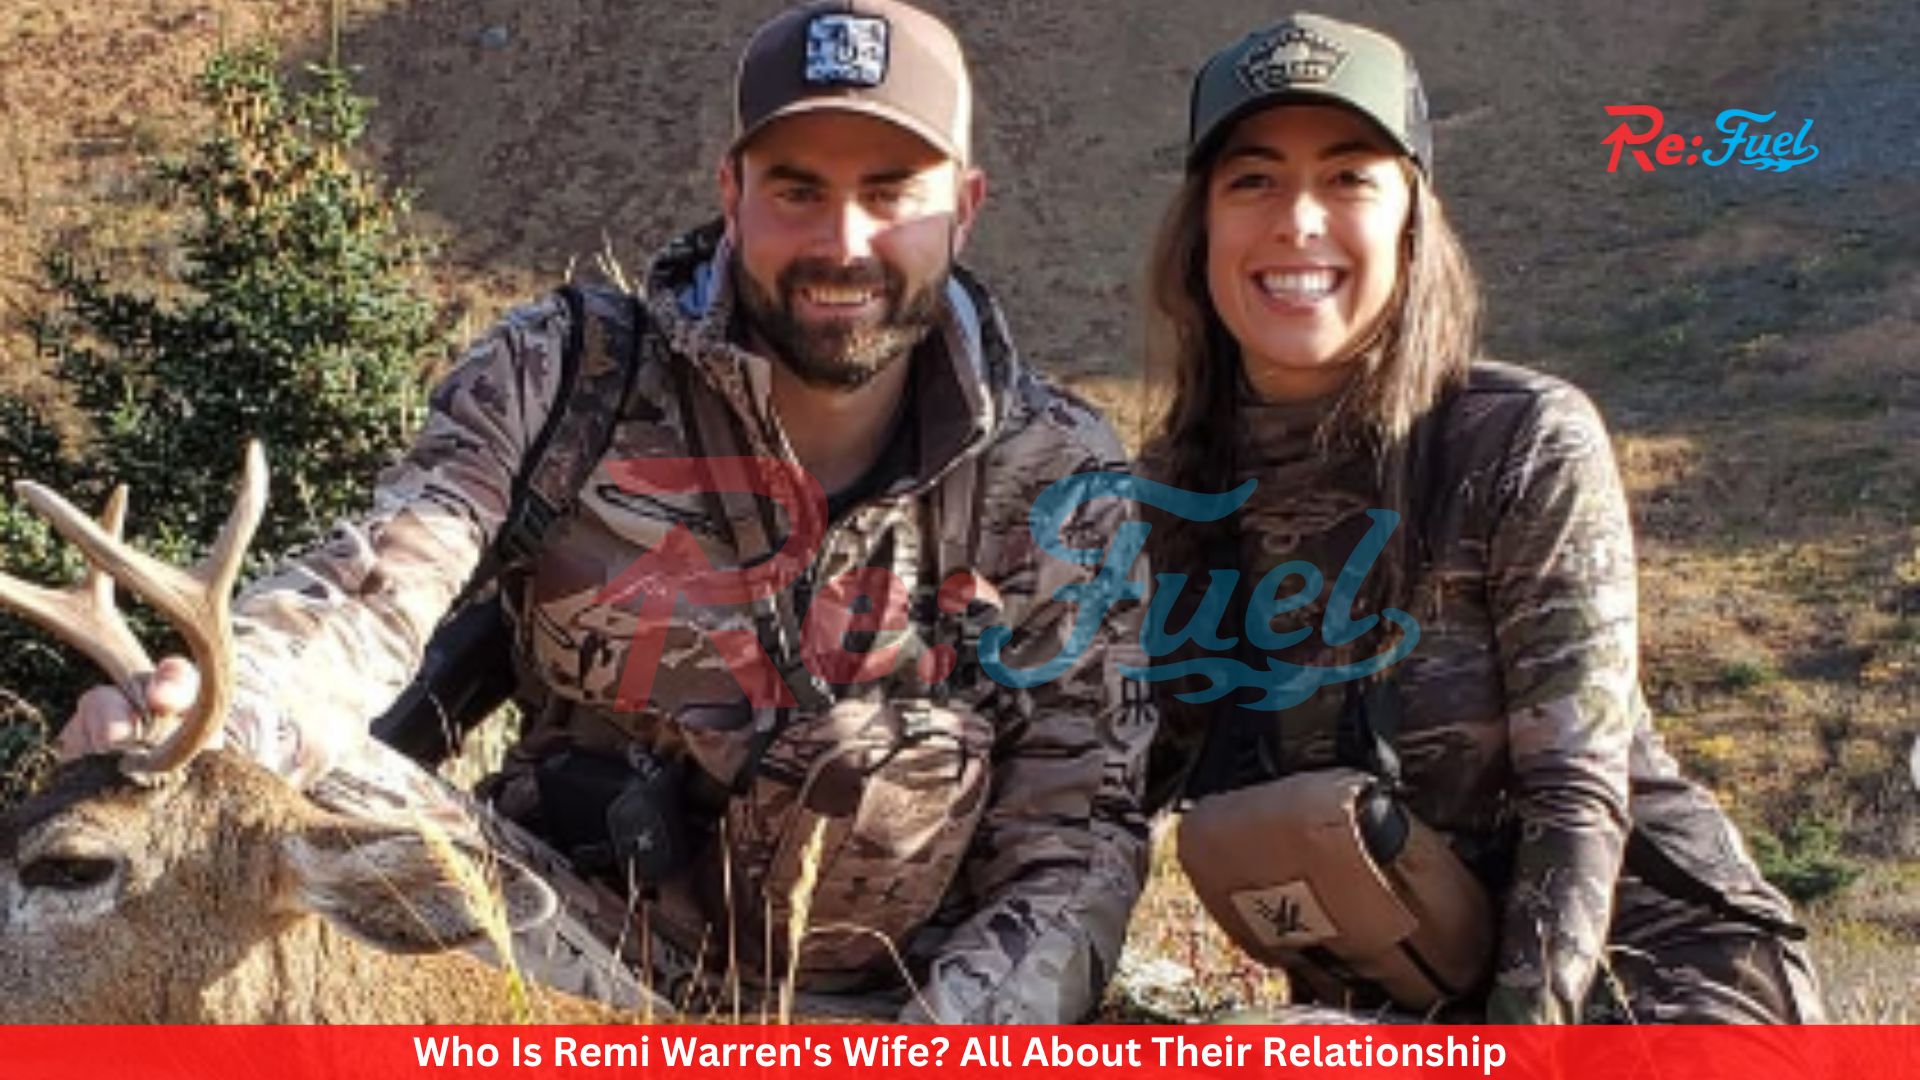 Who Is Remi Warren's Wife? All About Their Relationship